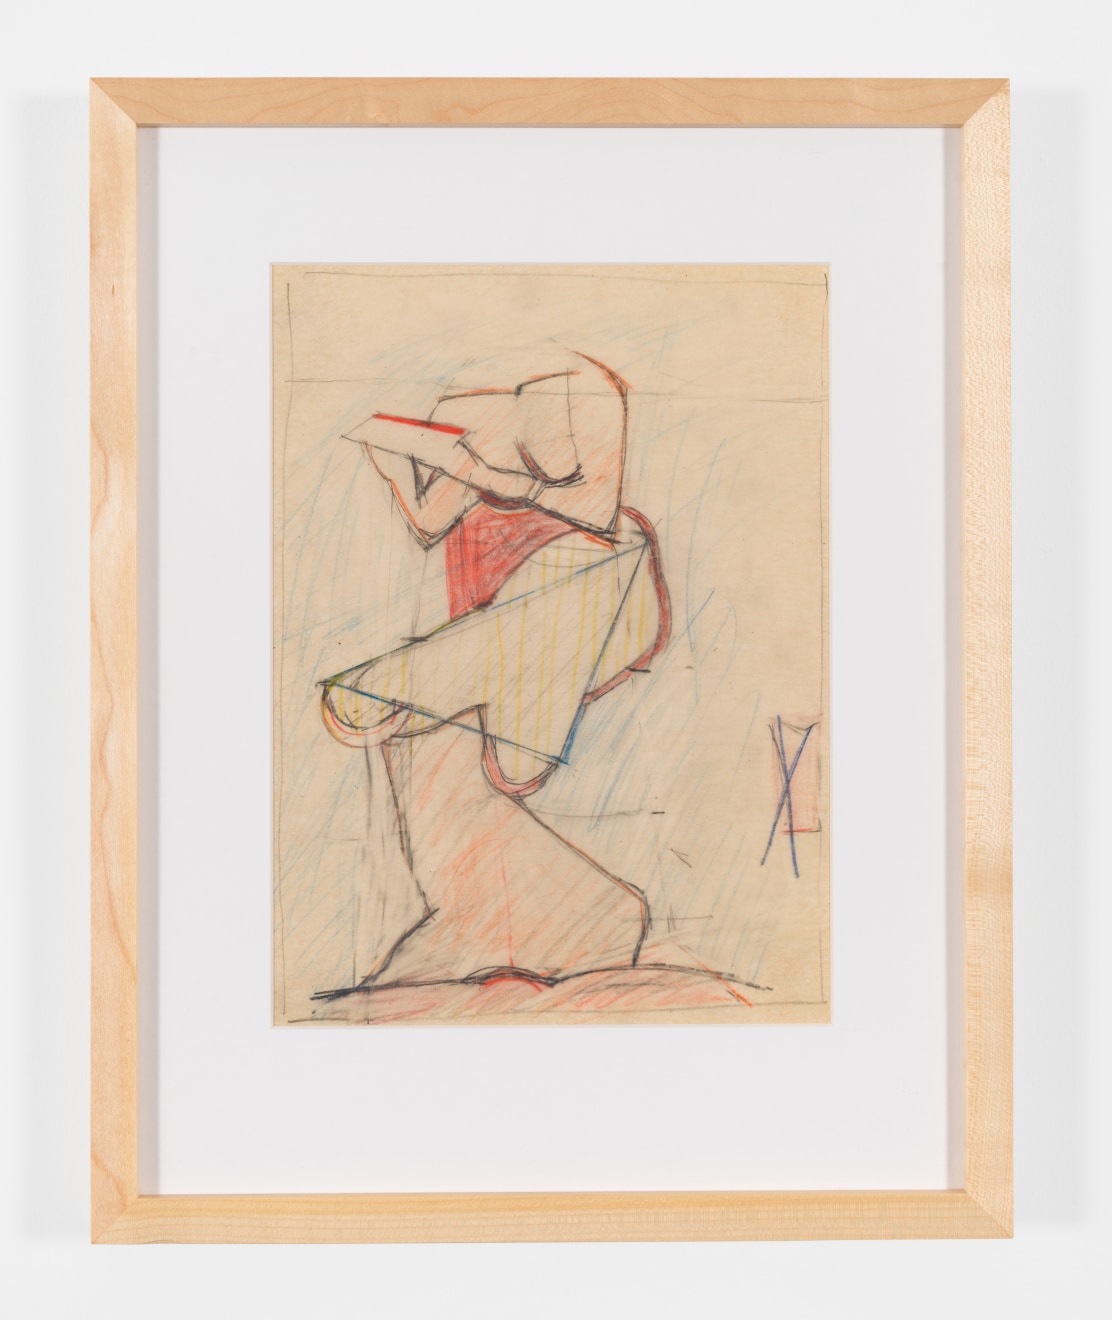 Untitled, 1968-1969 pencil and colored pencil on paper